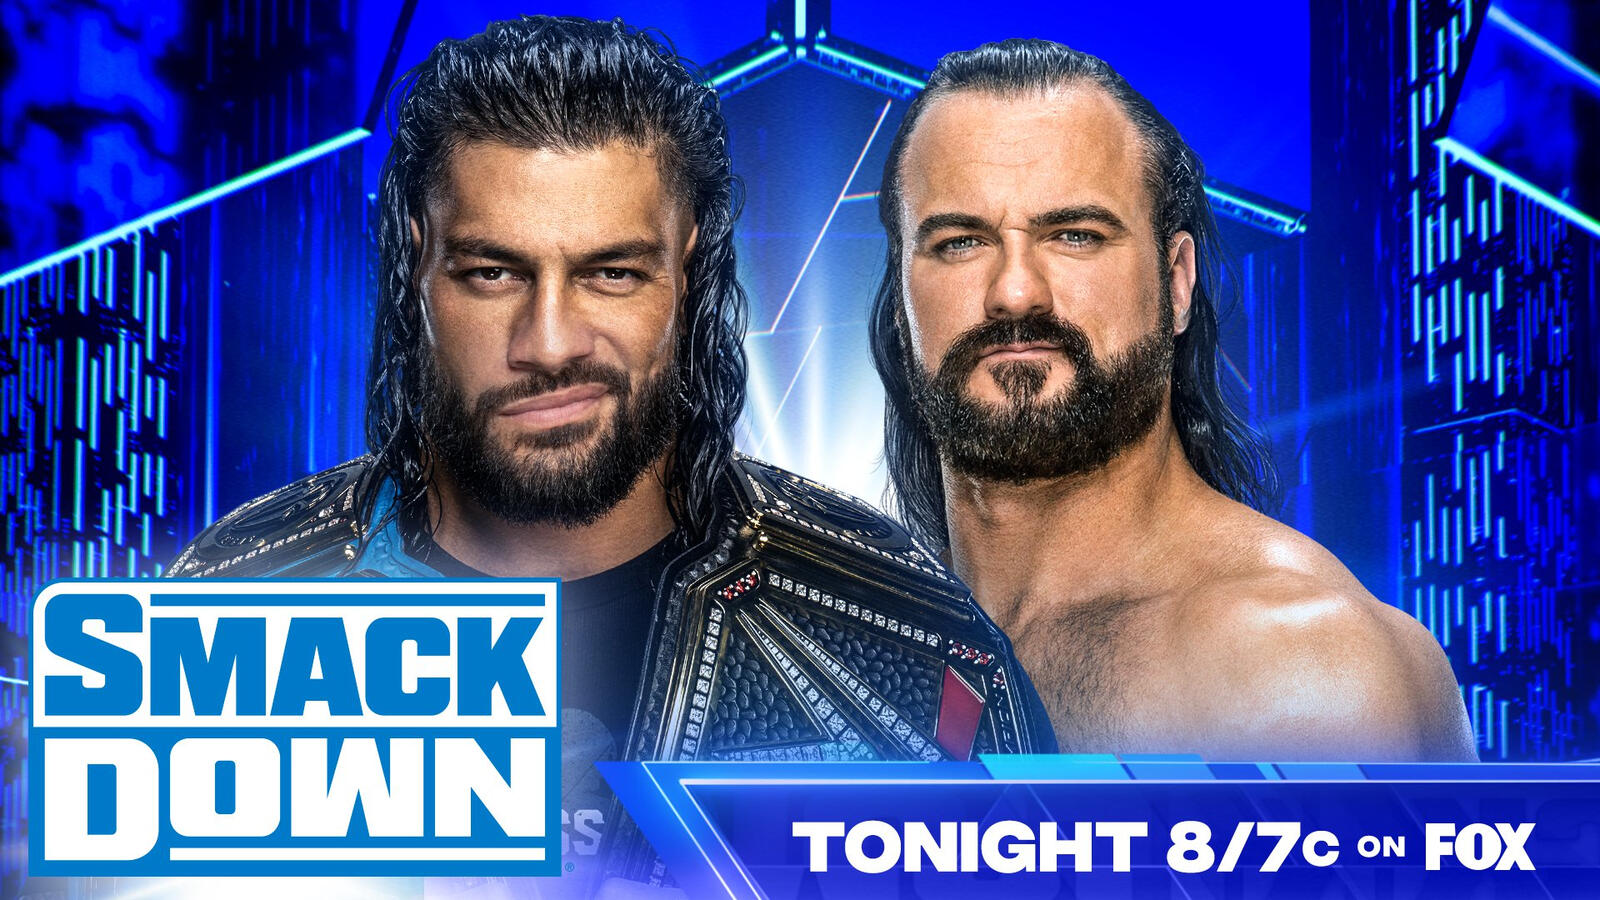 8/19 WWE SmackDown Preview - Roman Reigns and Drew McIntyre Face-To-Face